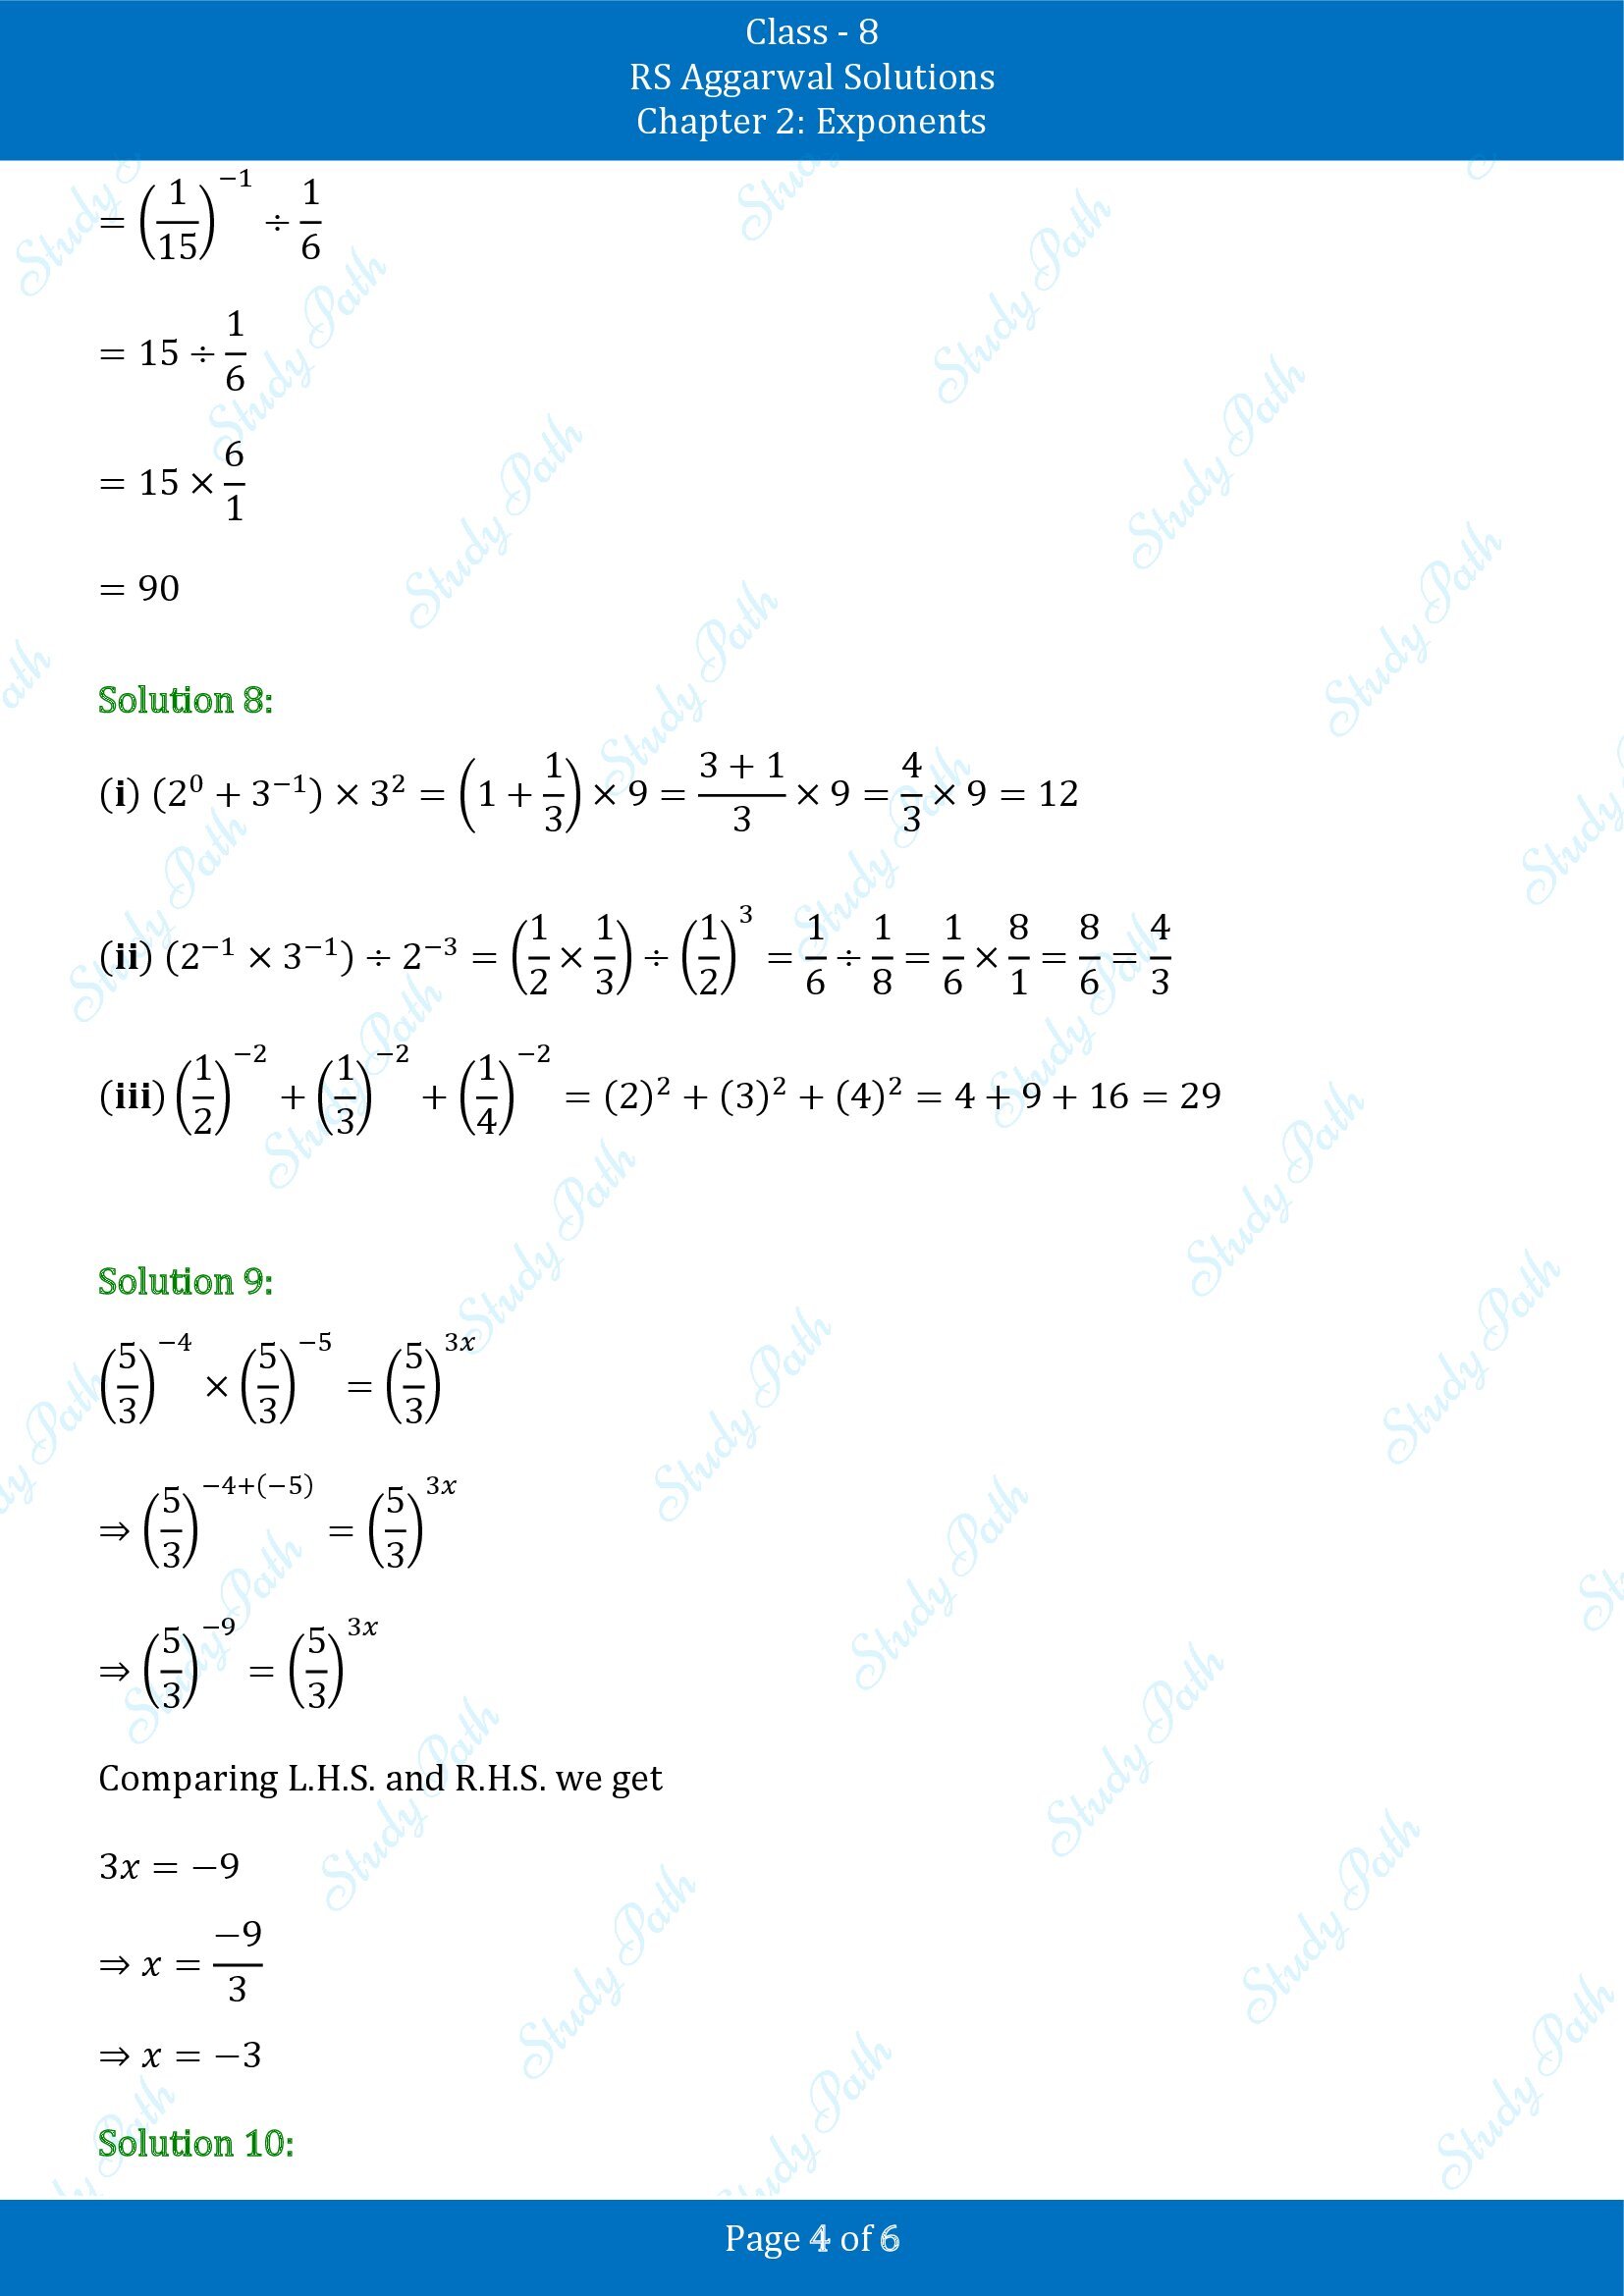 RS Aggarwal Solutions Class 8 Chapter 2 Exponents Exercise 2A 00004